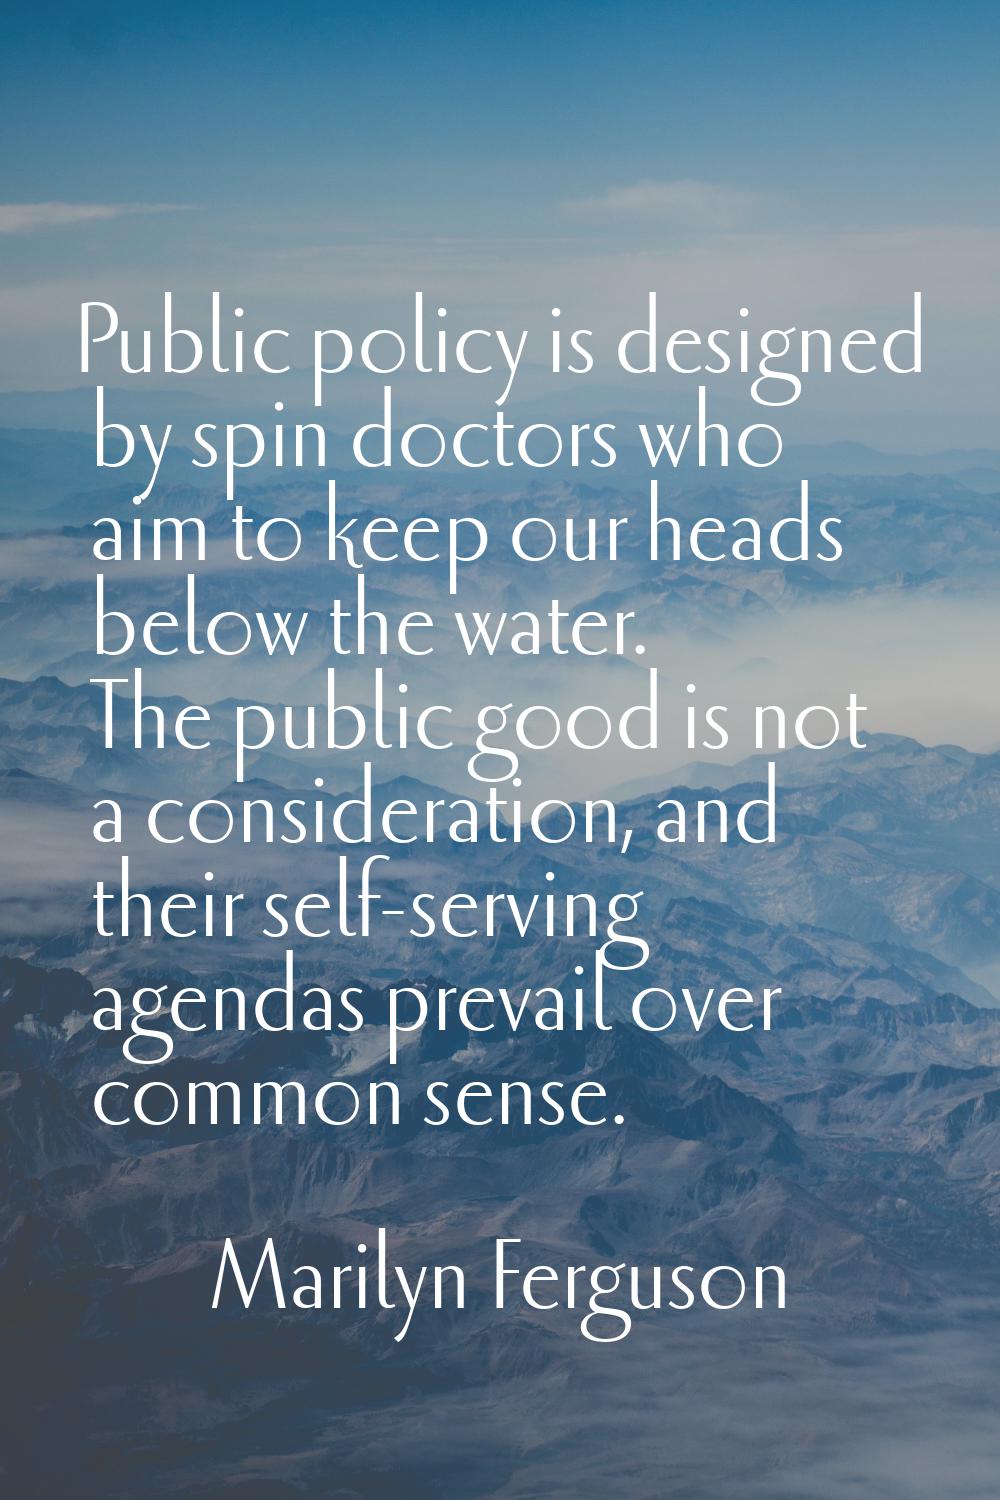 Public policy is designed by spin doctors who aim to keep our heads below the water. The public goo